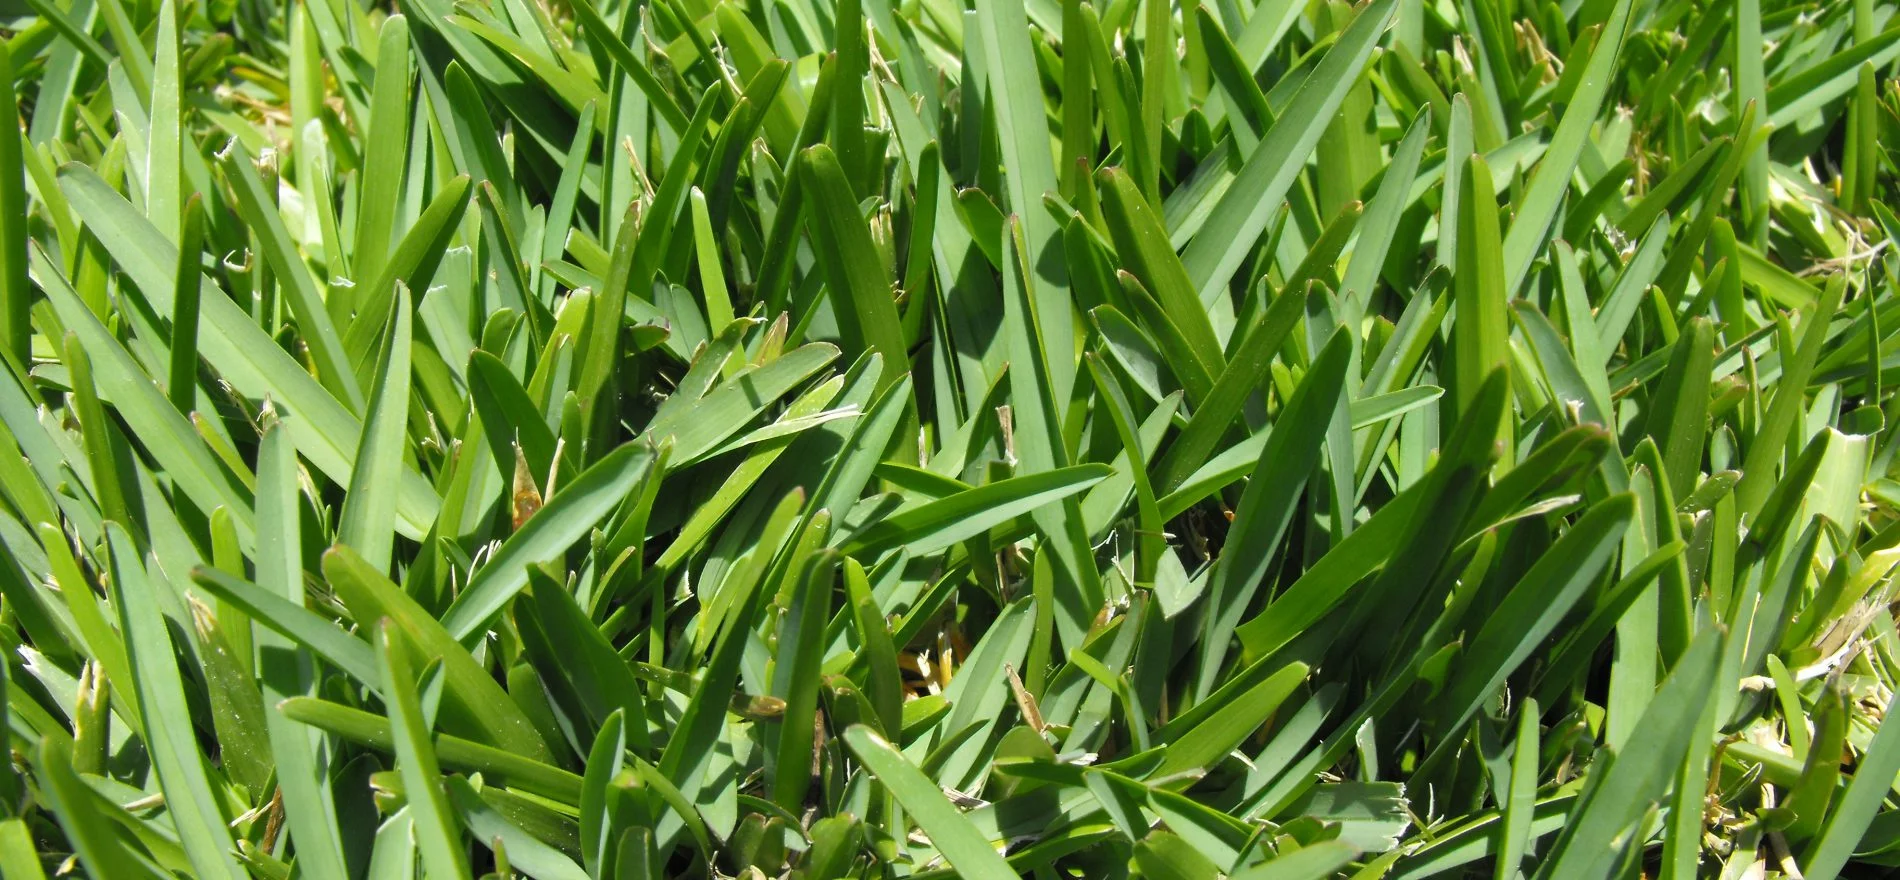 How To Get St Augustine Grass Green